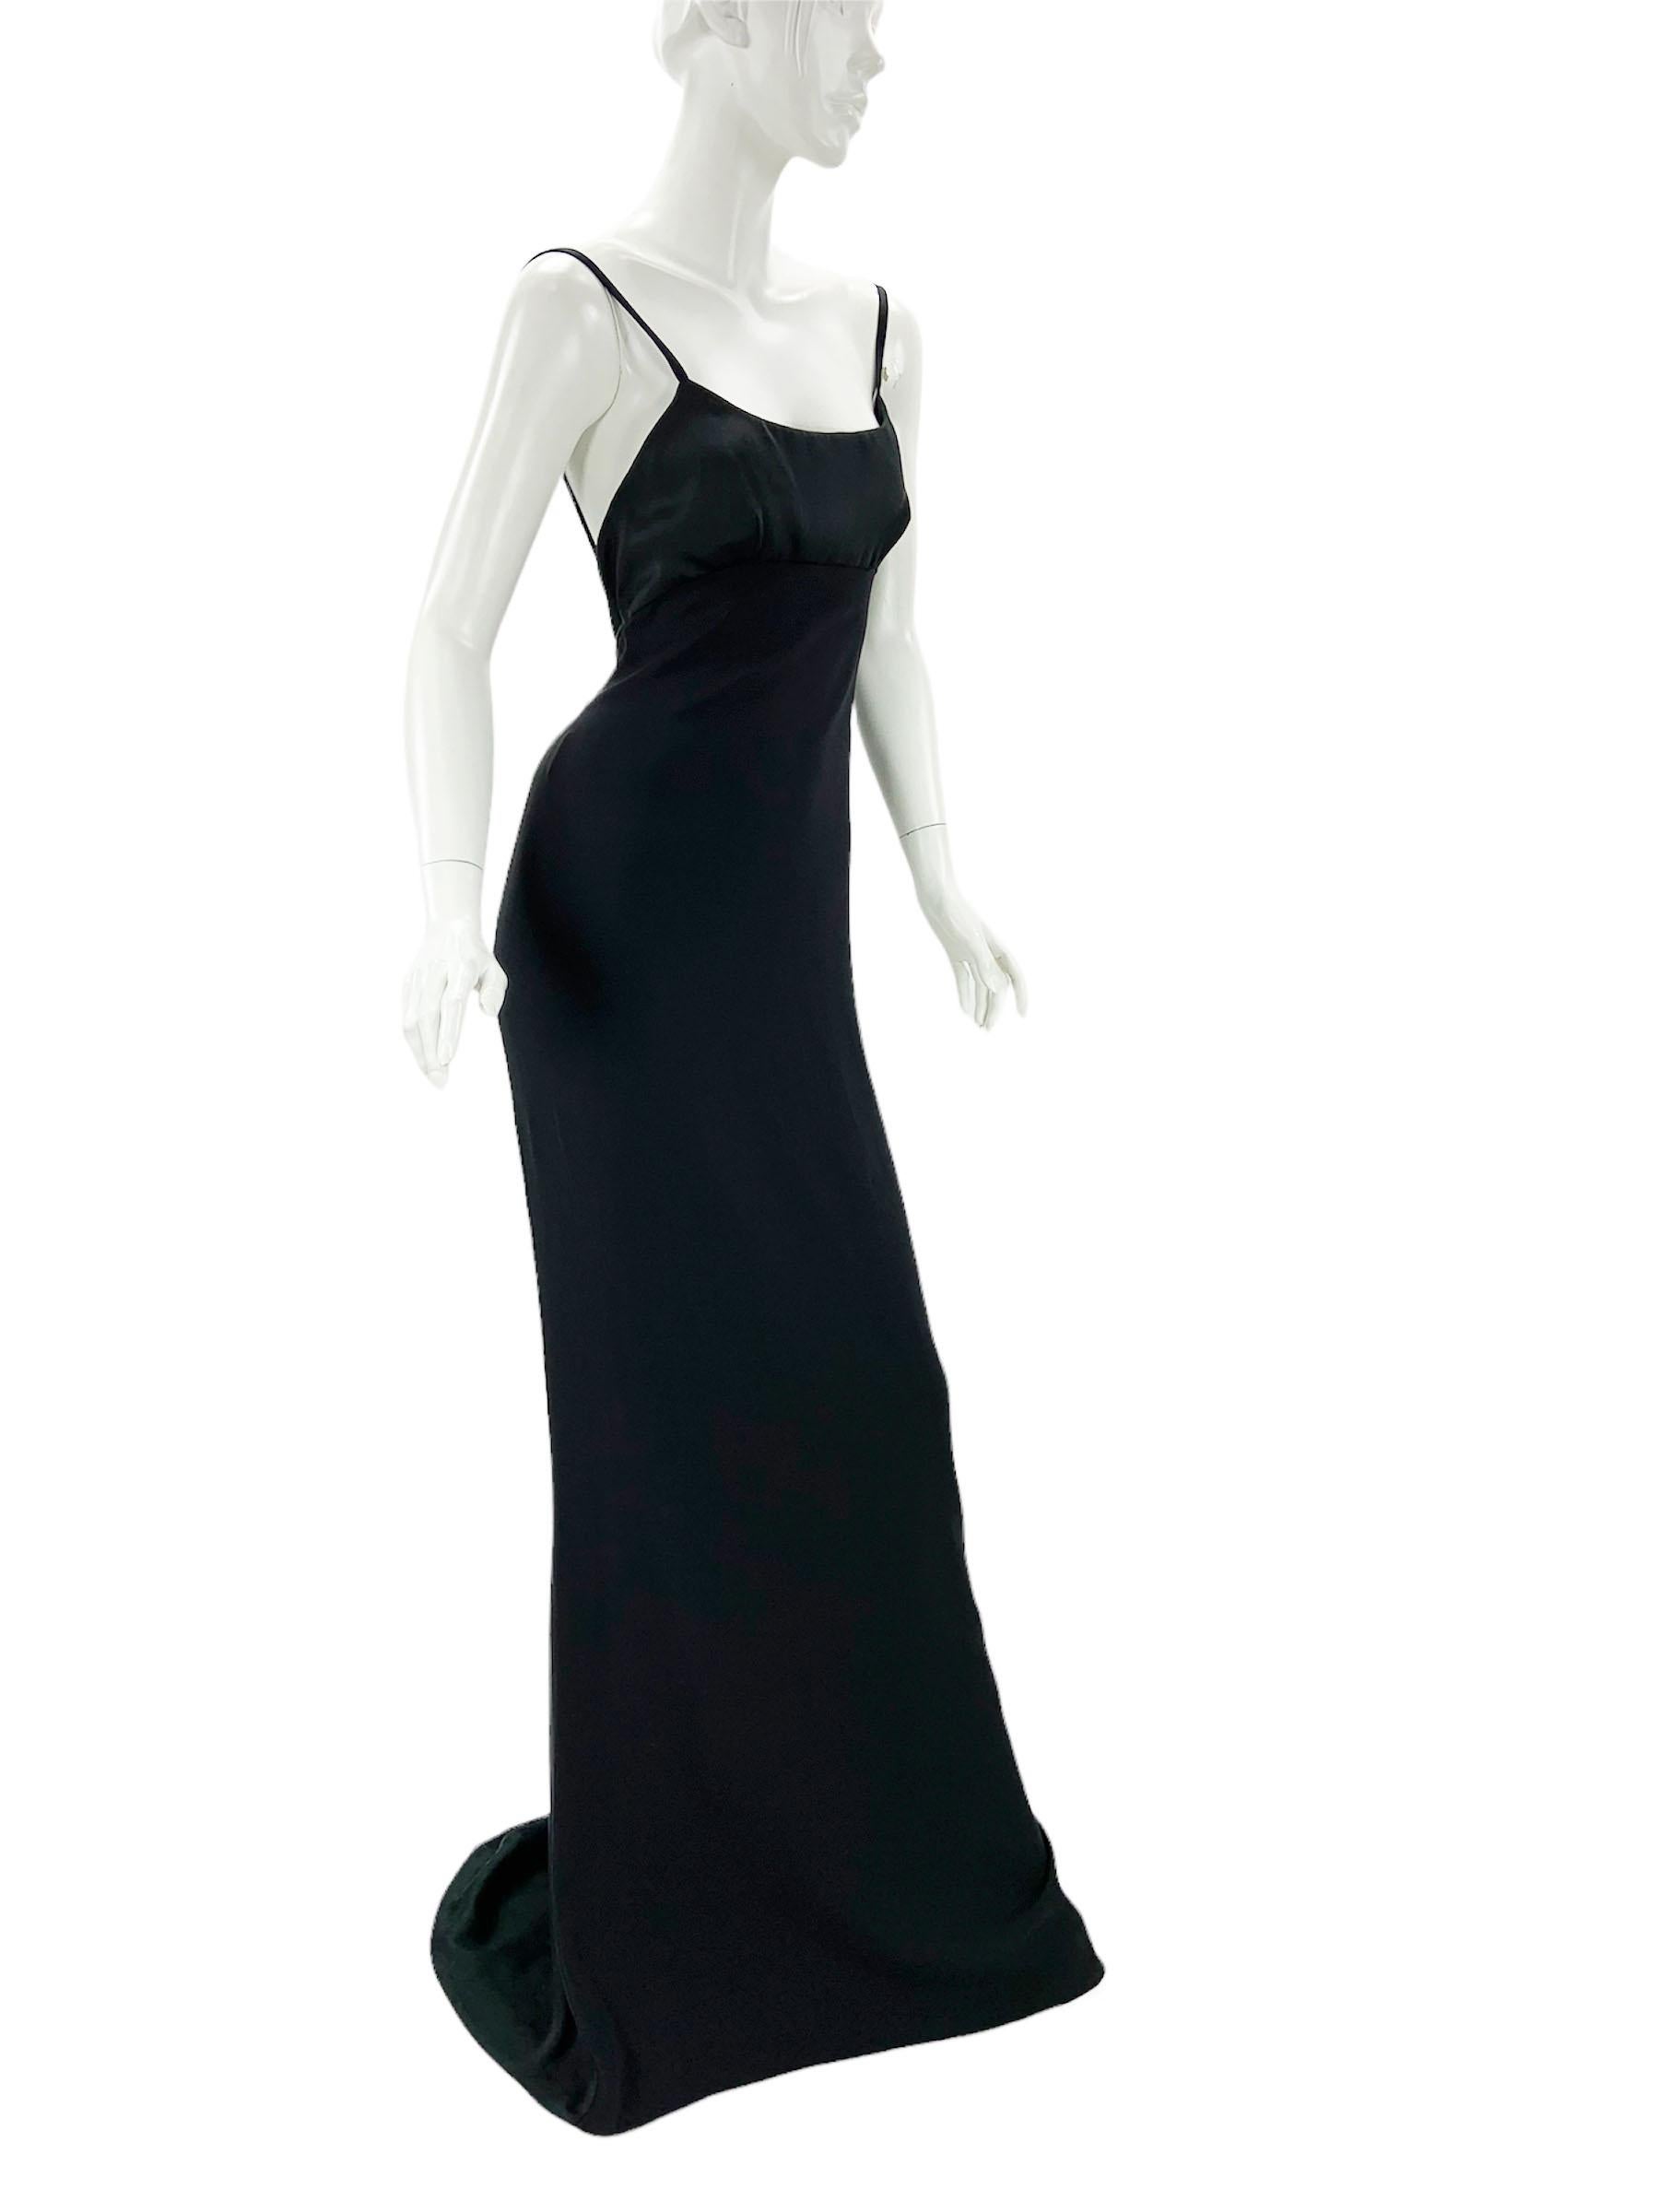 NWT Tom Ford for Gucci Black Silk Long Dress Gown
Simply the Best and Classy!!!
S/S 2001 Collection
Italian size 40 - US 4 ( please check measurements).
Classy black silk gown with open back. 
The shine of satin on the bust with satin inserts at the